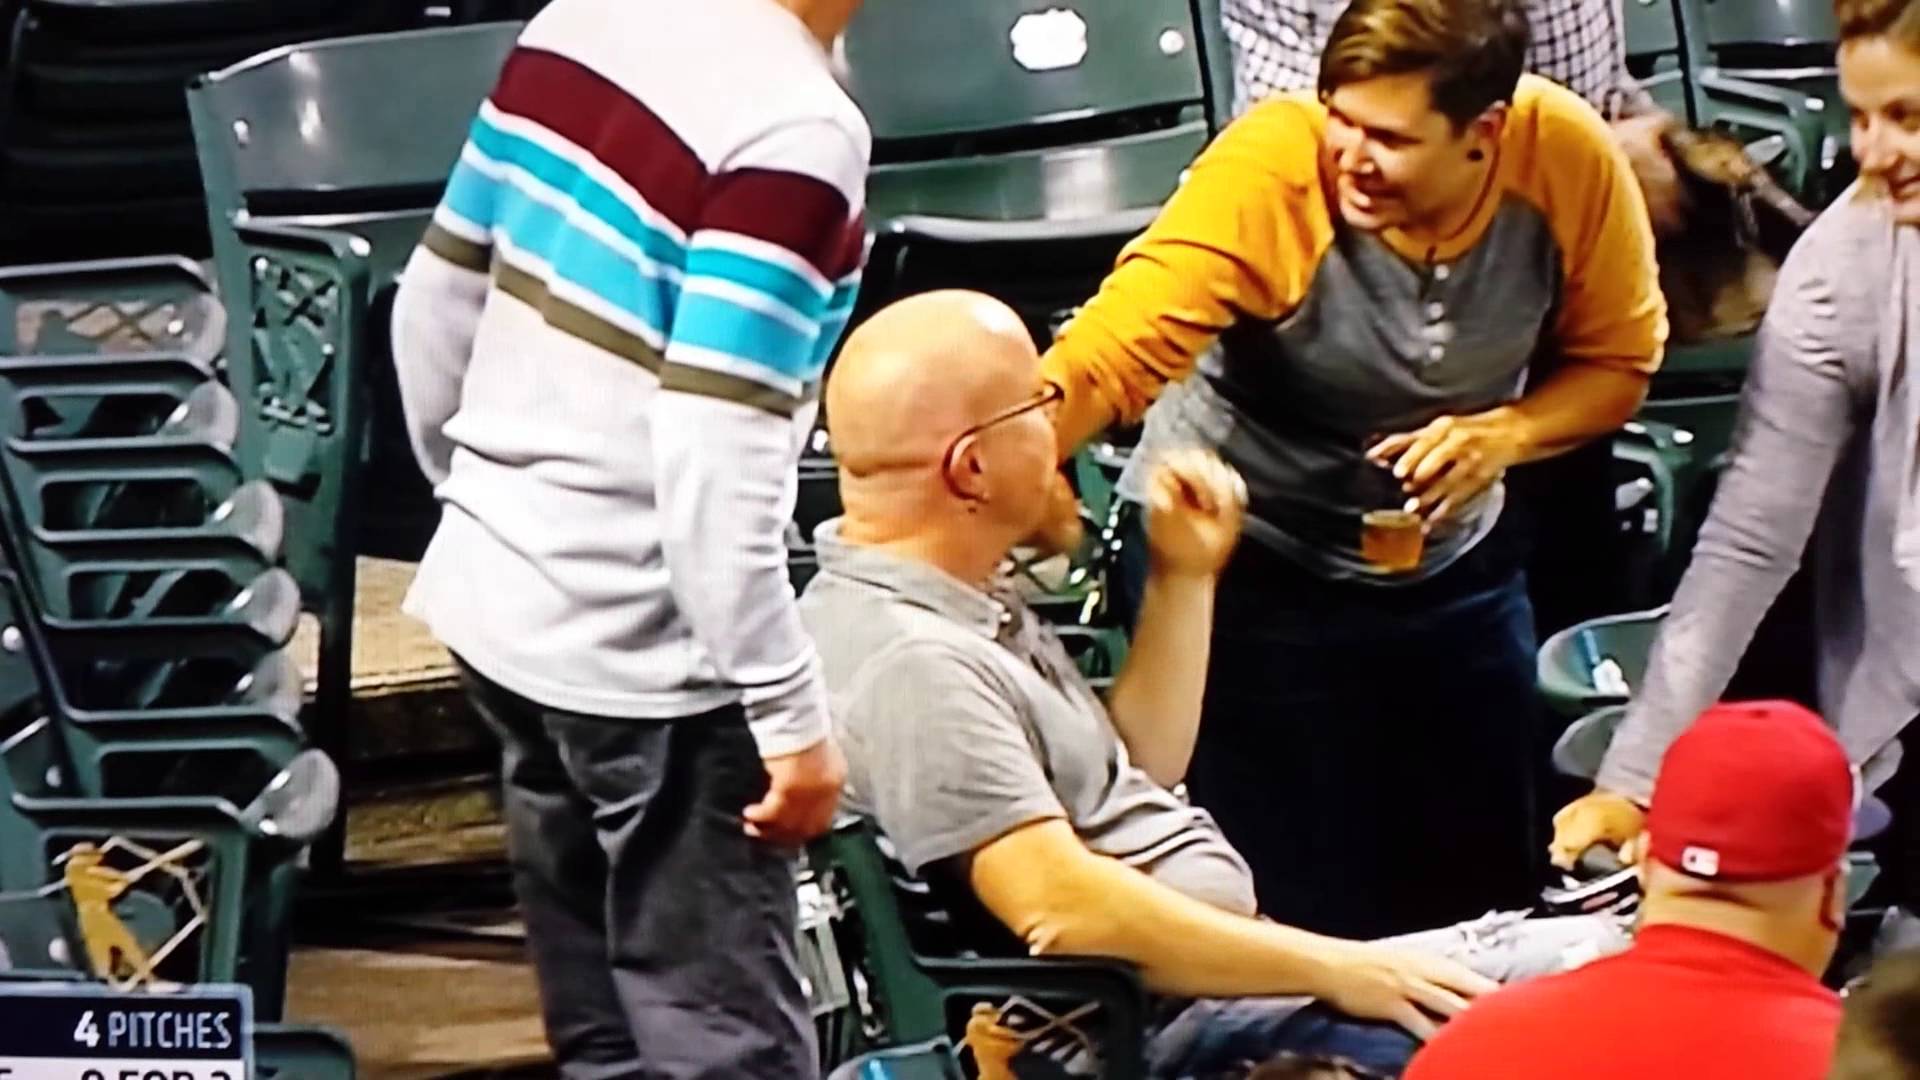 Ouch: Fan hit in head by a foul ball at Indians game